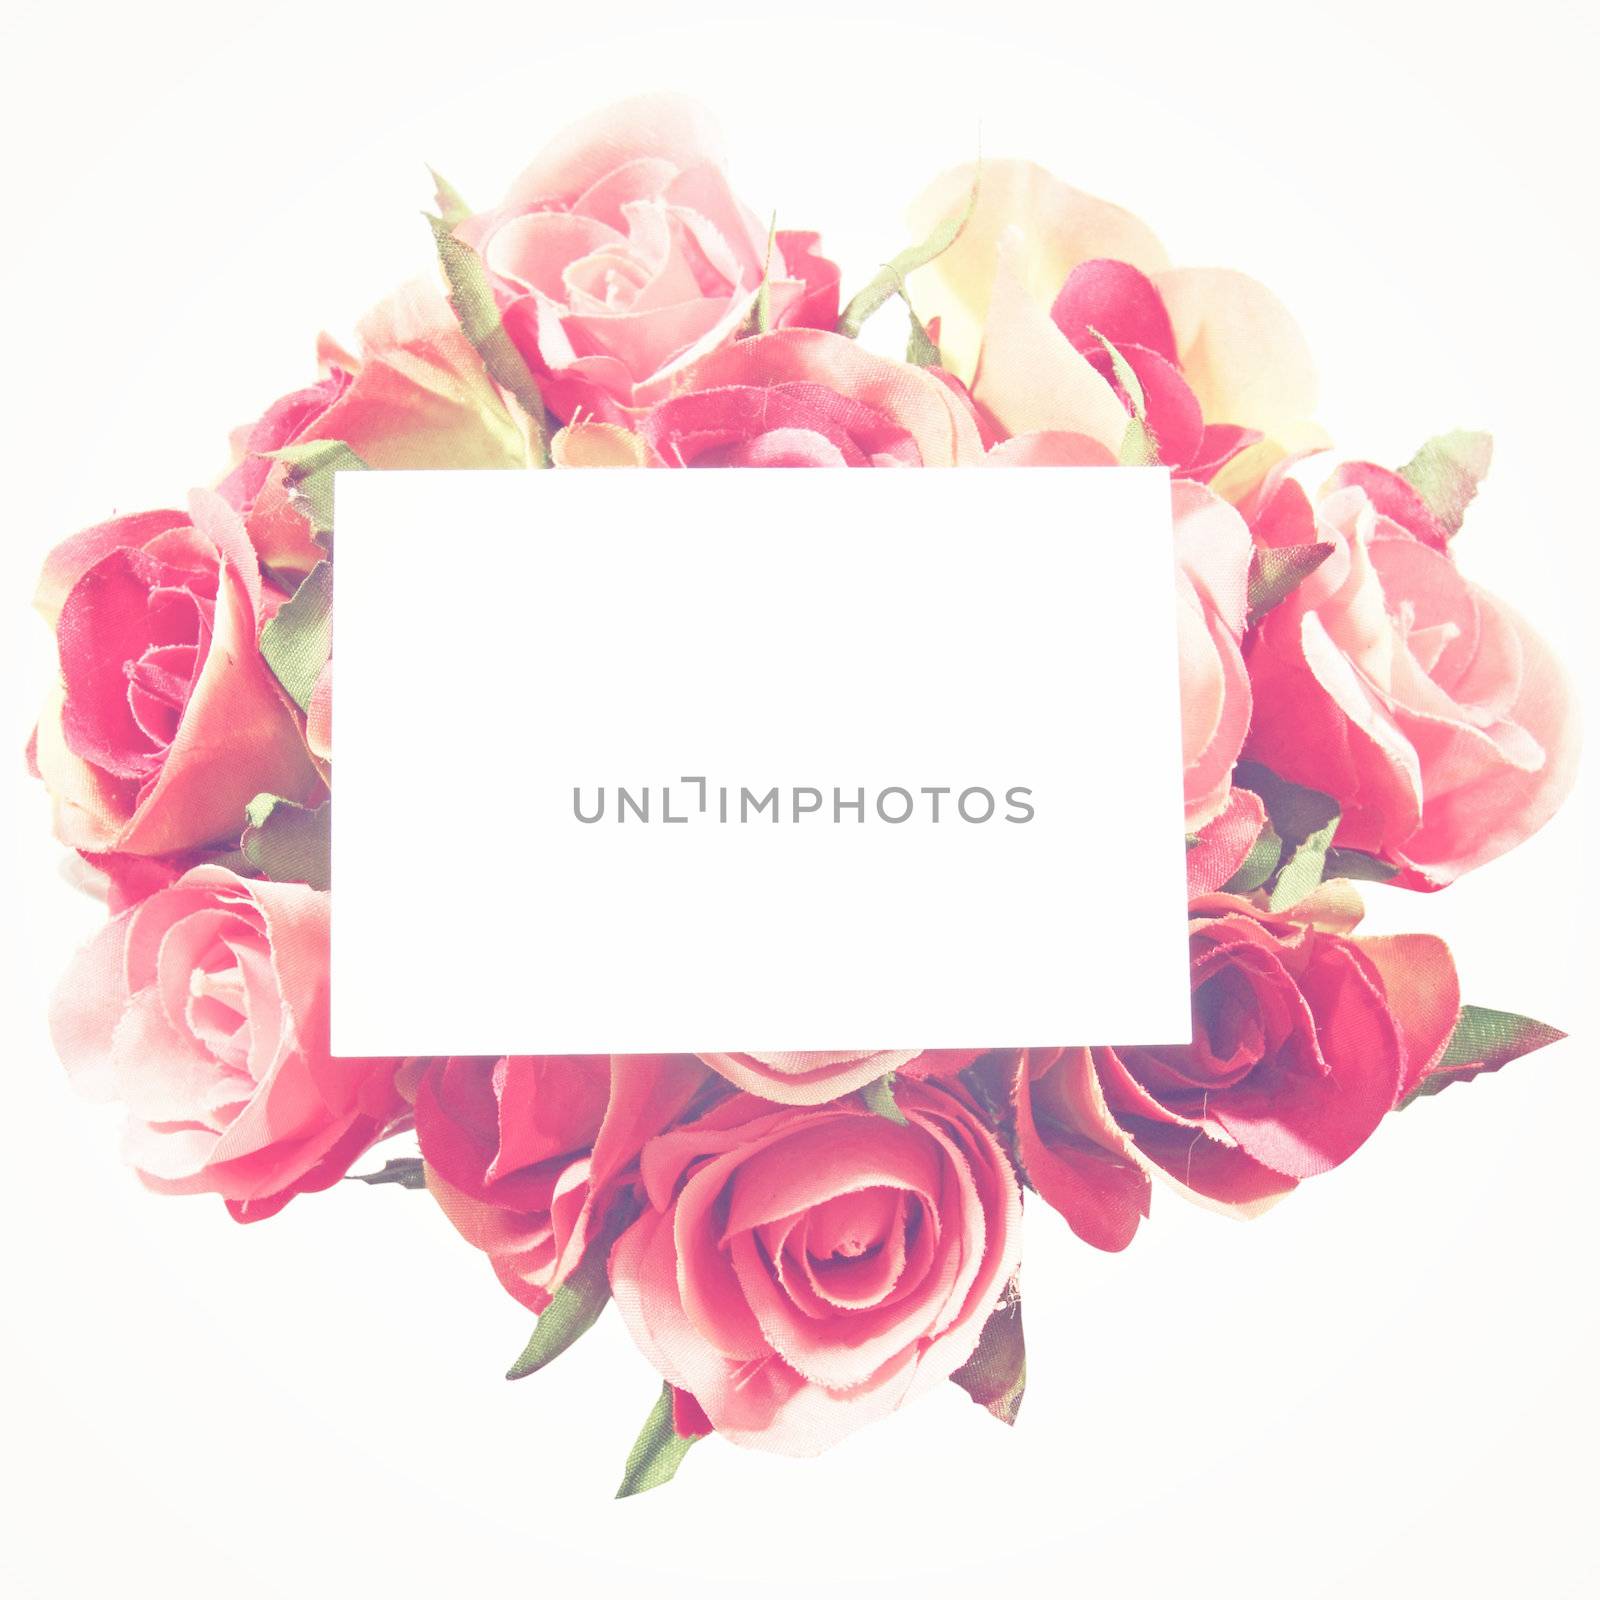 Blank card and rose with retro filter effect by nuchylee